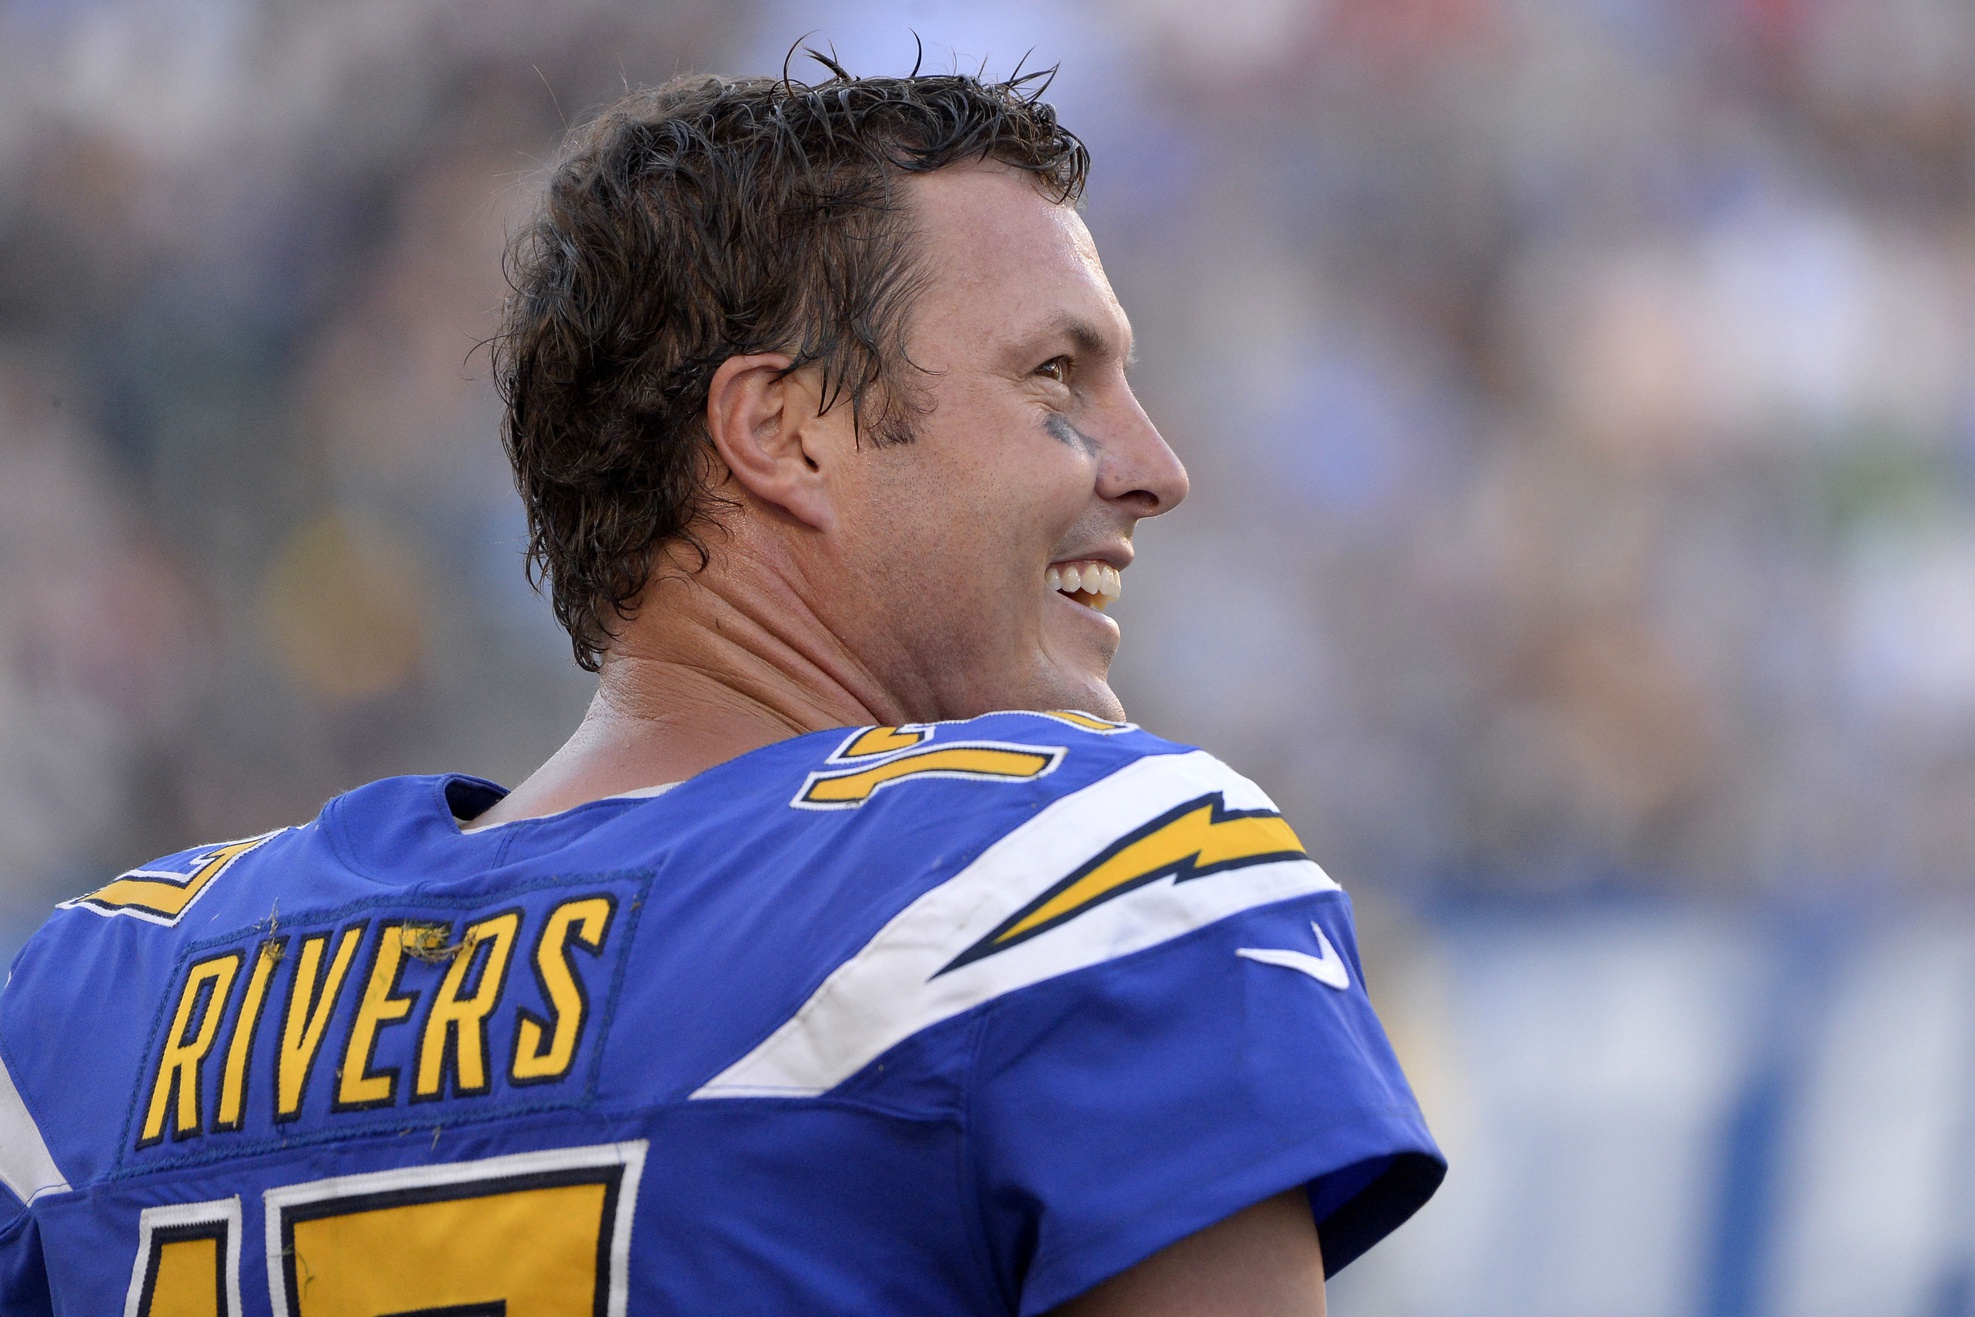 Philip Rivers, heading into final year of contract, skips start of Chargers offseason